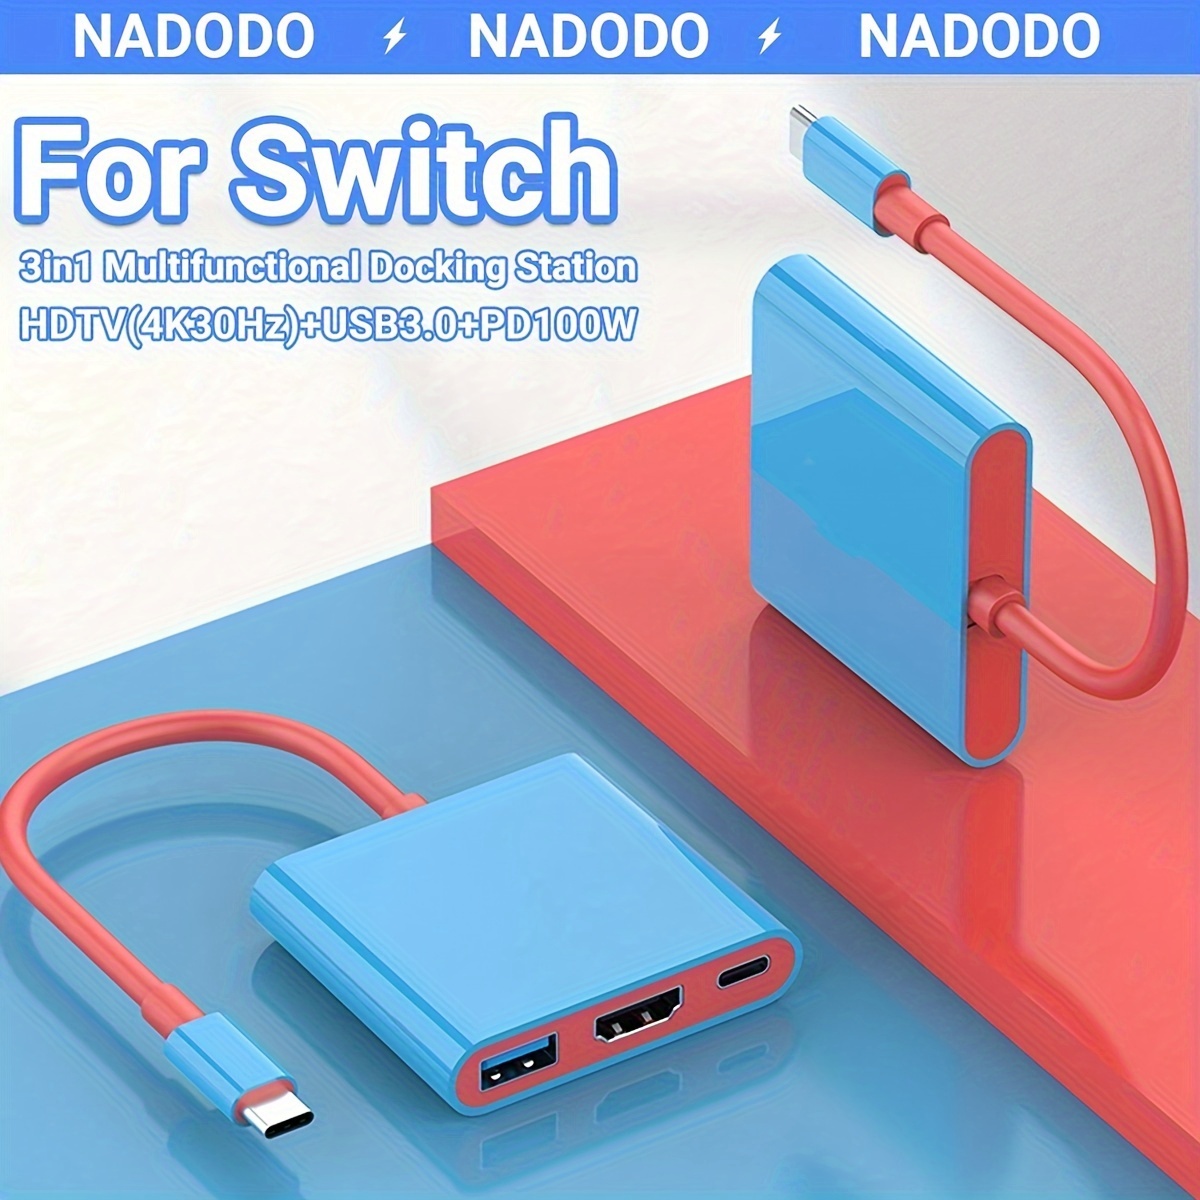 

Nadodo Dock For Switch Docking Station, Portable Tv Dock Adapter Compatible For Switch/oled/steam Deck Support For Switch Tv Mode With Hdtv1.4, Pd100w, Usb3.0 Replacement Travel Dock For Switch